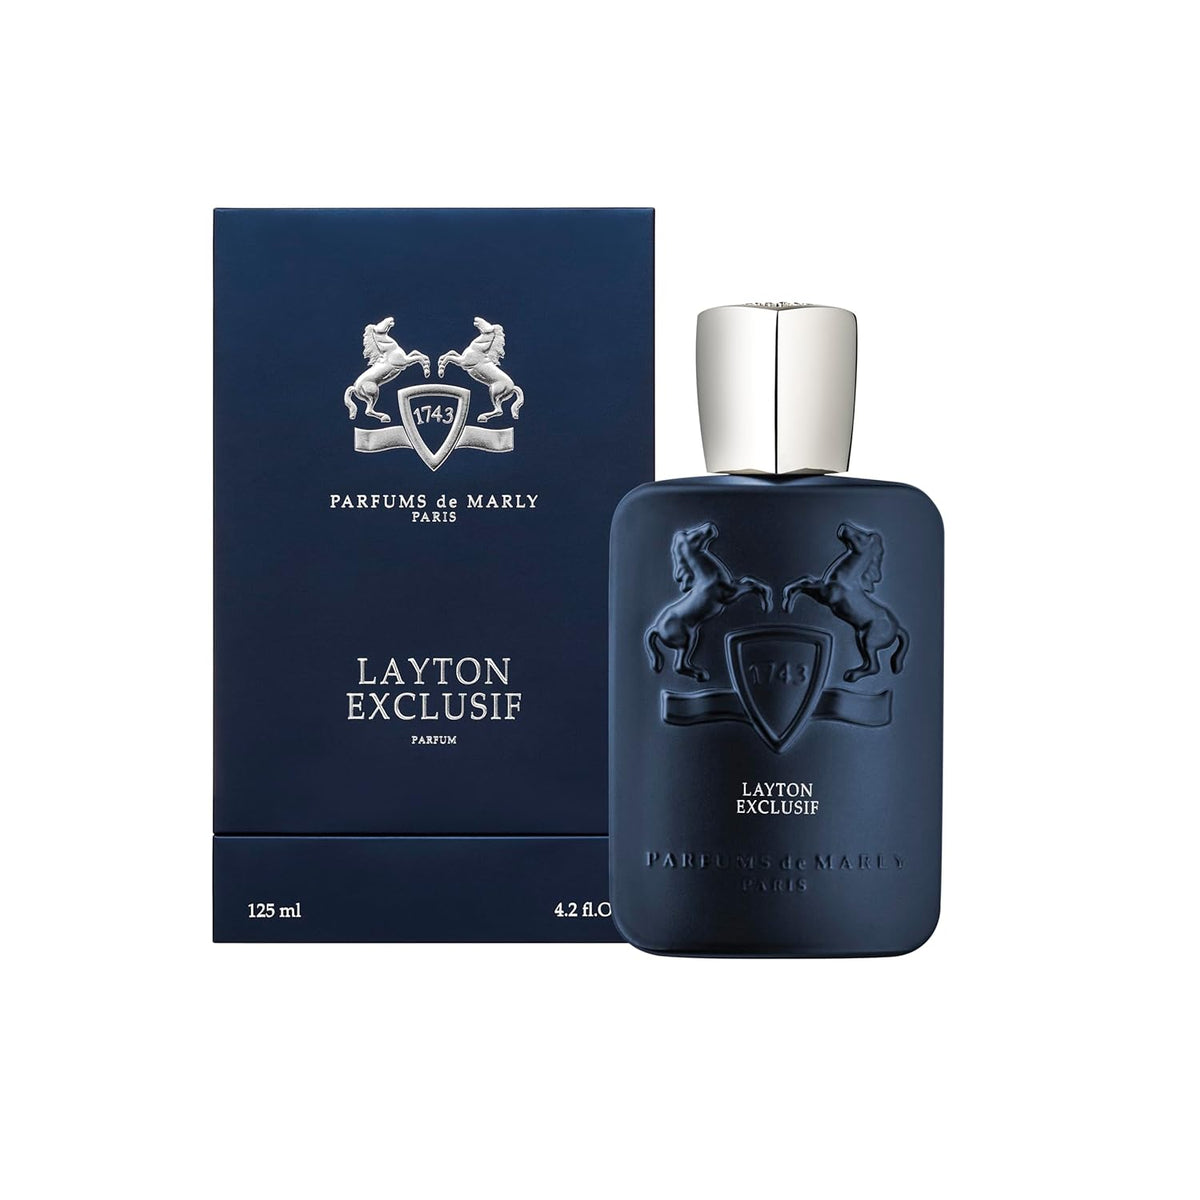 PARFUMS DE MARLY Layton Exclusive EDP Spray for unisex